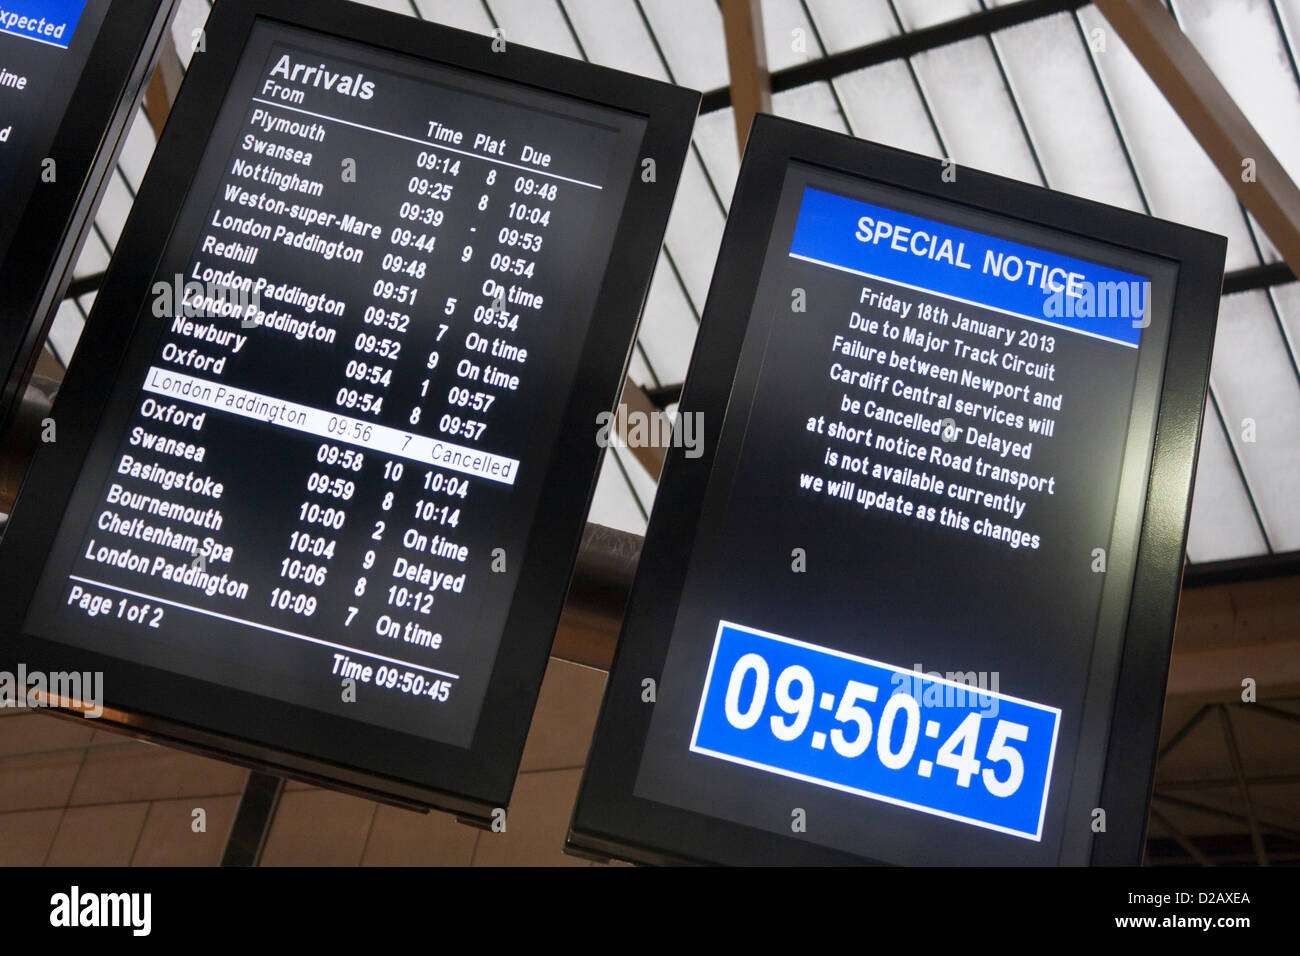 18th January 2013. Reading, Berkshire, UK. Electronic noticeboards at the town's central train station advise passengers of delays and cancellations to services. A special notice informs of a major track circuit failure in Wales. © Danny Callcut Stock Photo